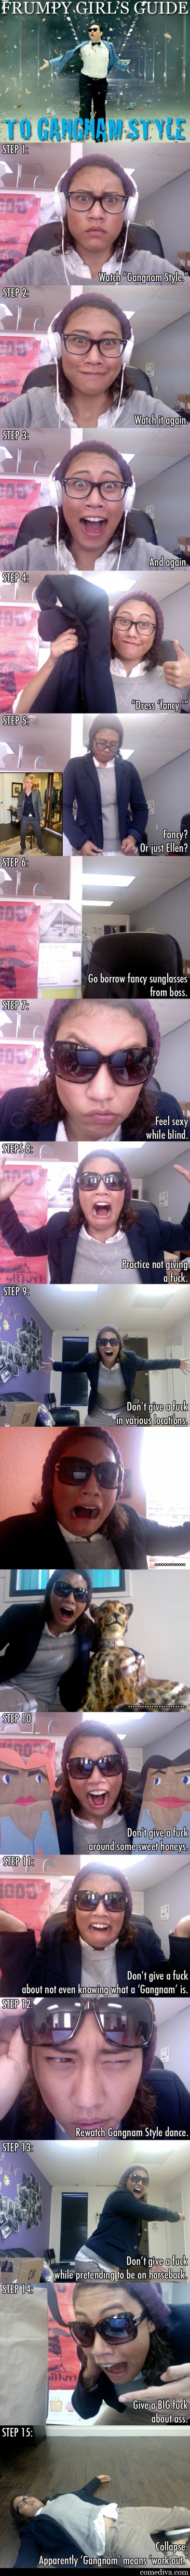 Frumpy Girl’s Guide to Gangnam Style